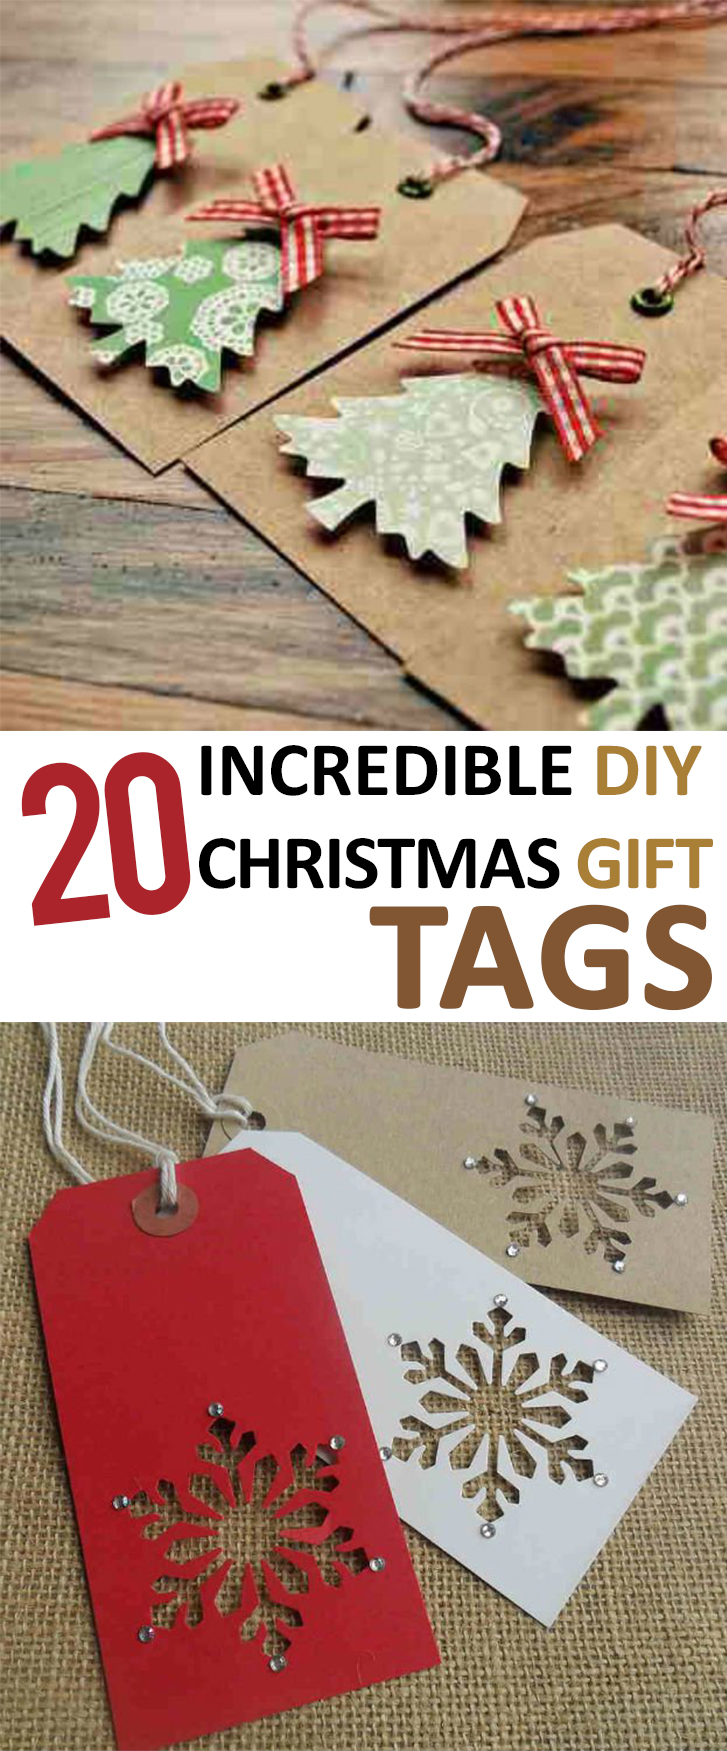 the-24-best-ideas-for-christmas-gift-tags-diy-home-family-style-and-art-ideas